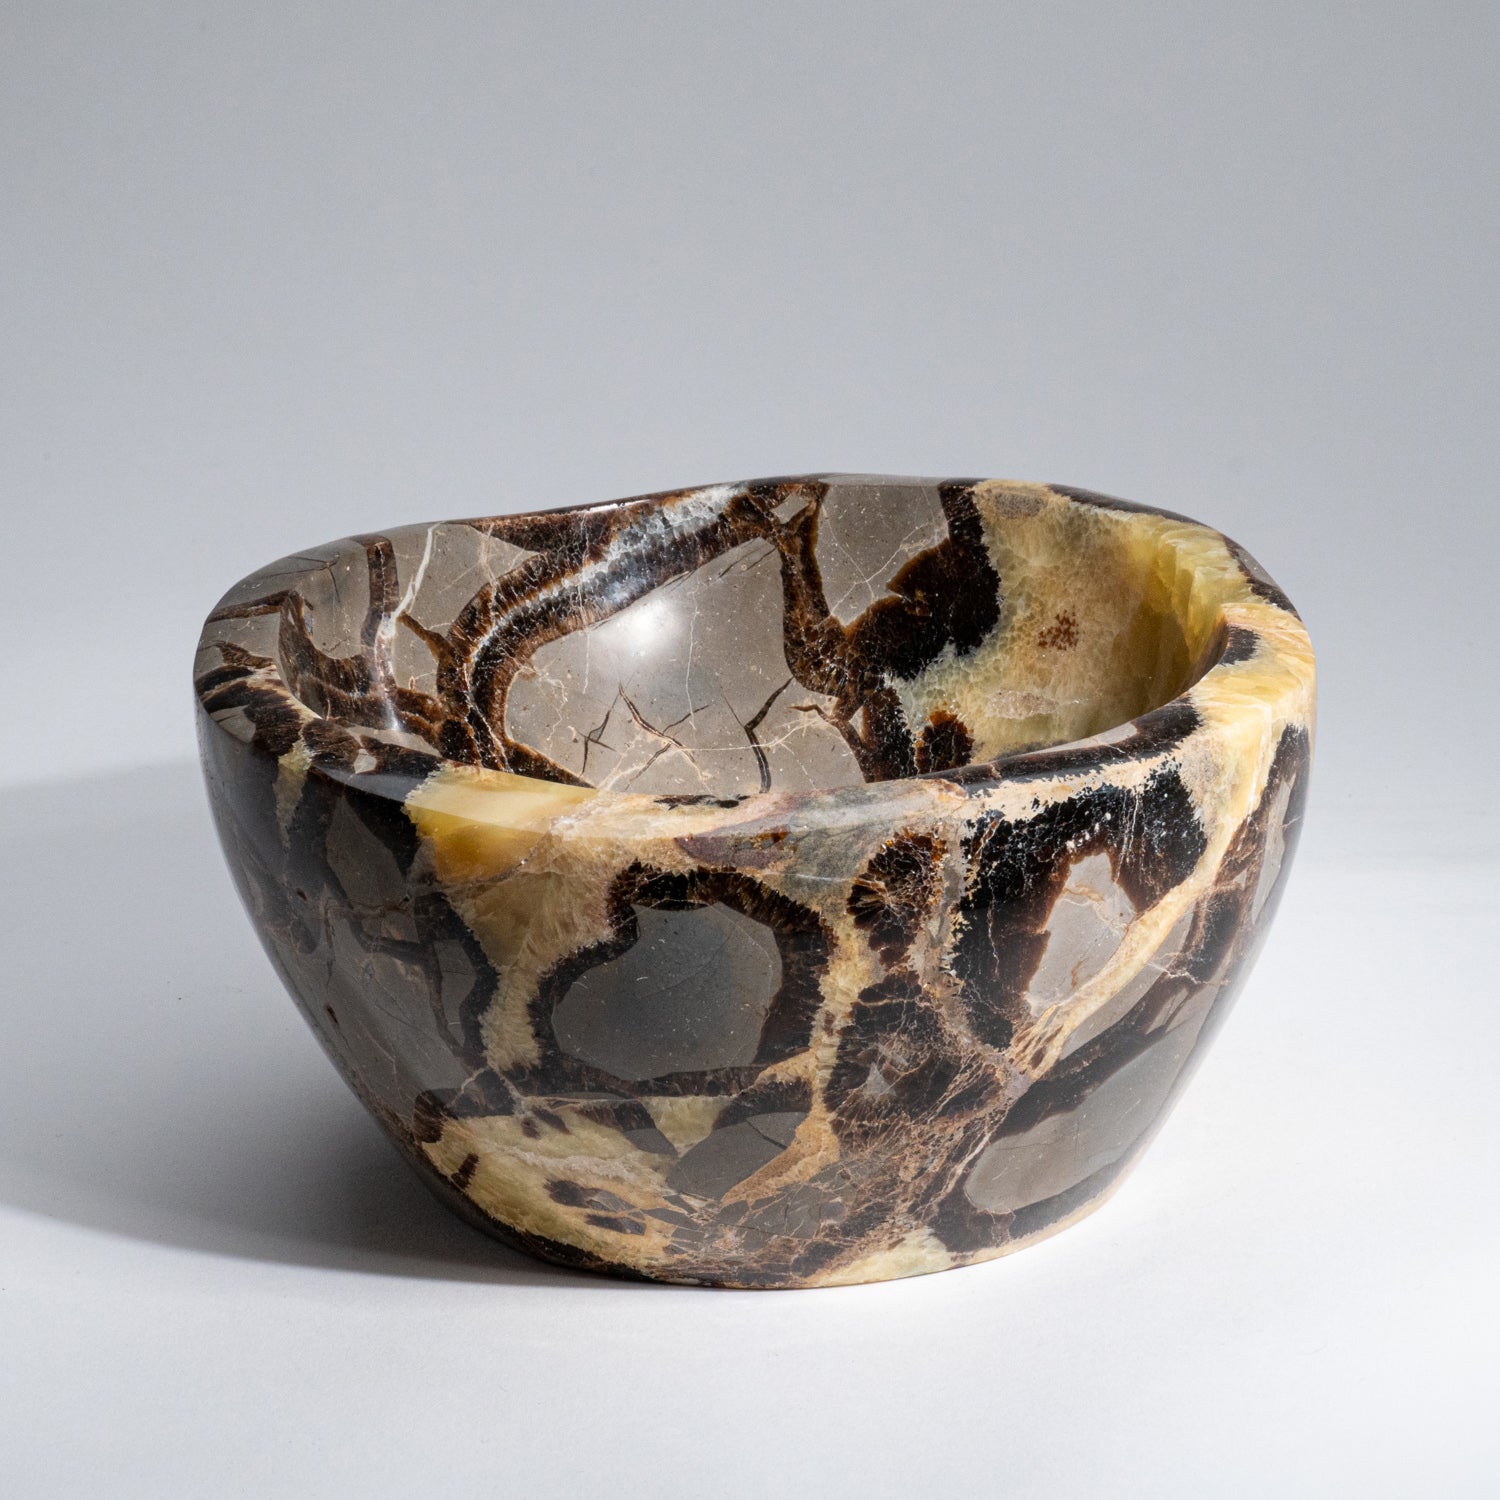 Genuine Polished Septarian Bowl from Madagascar (4 lbs)